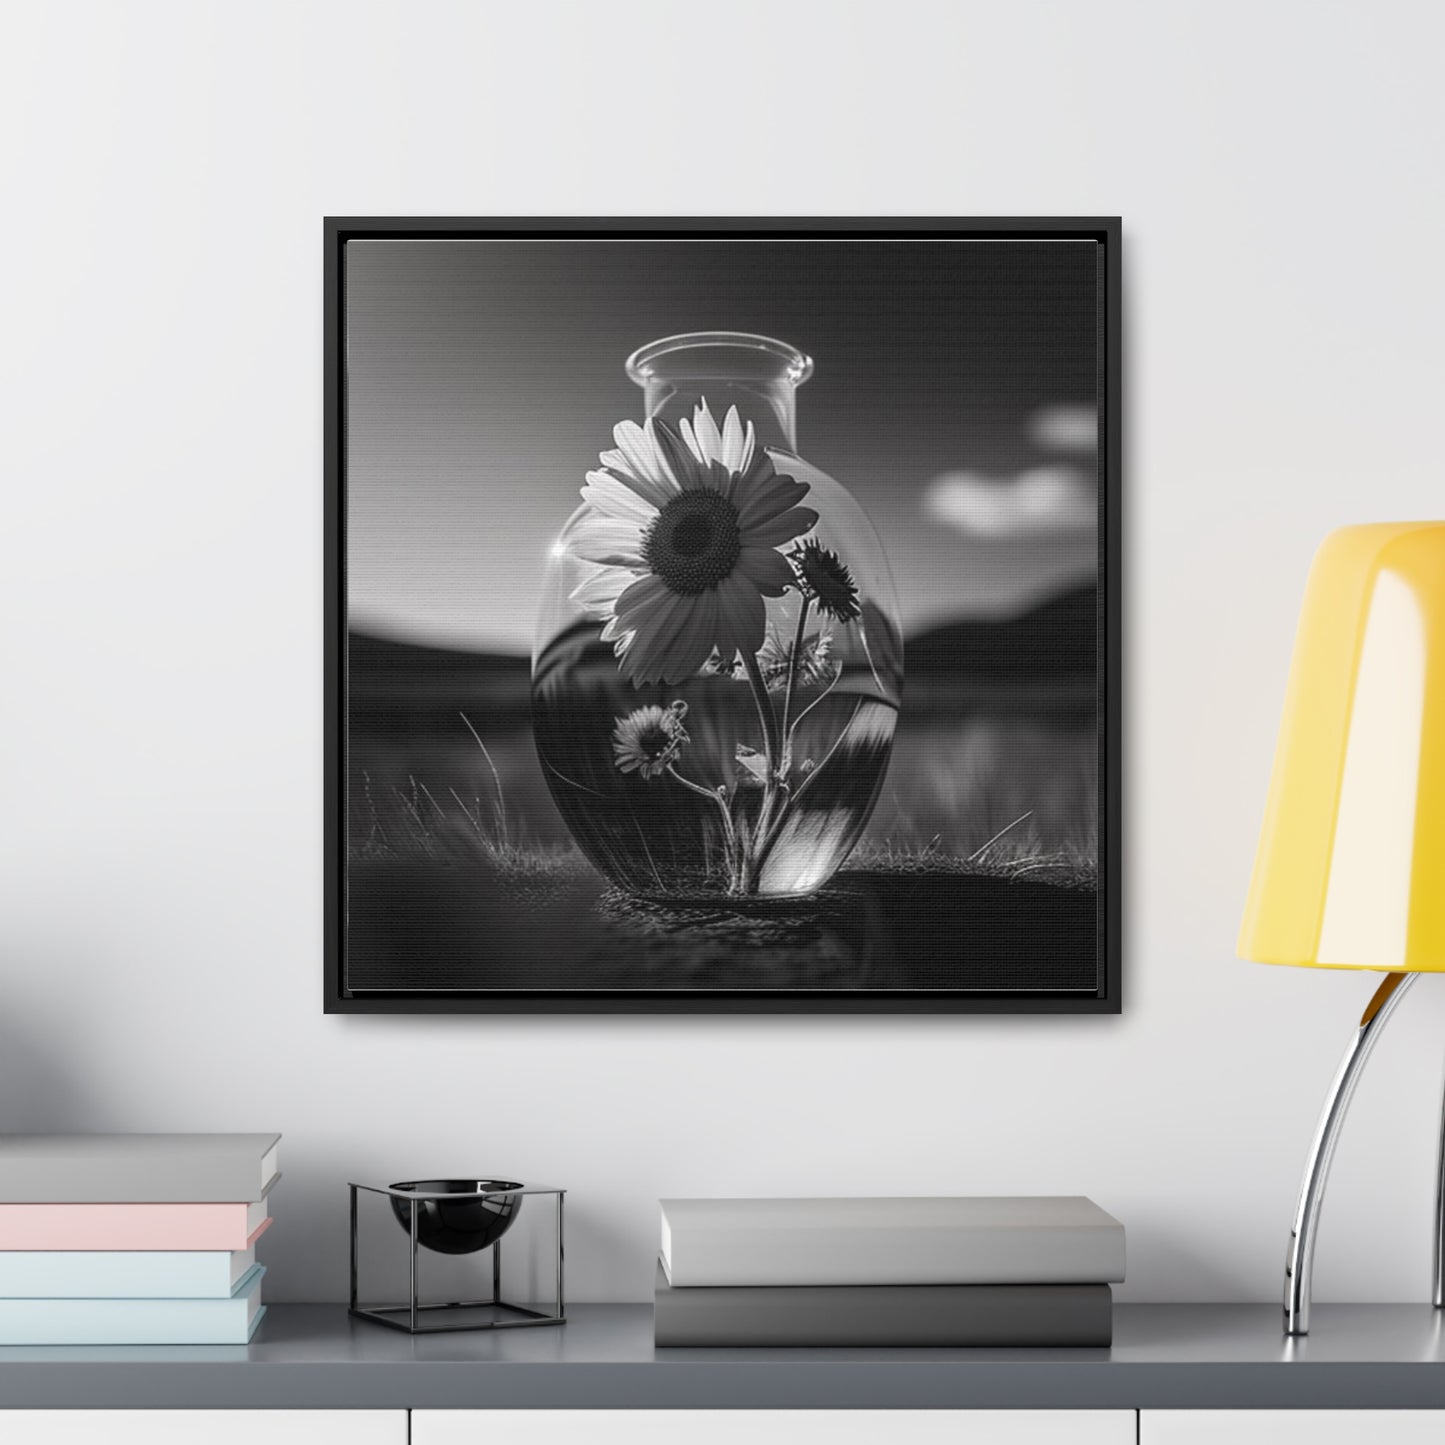 Gallery Canvas Wraps, Square Frame Yellw Sunflower in a vase 4